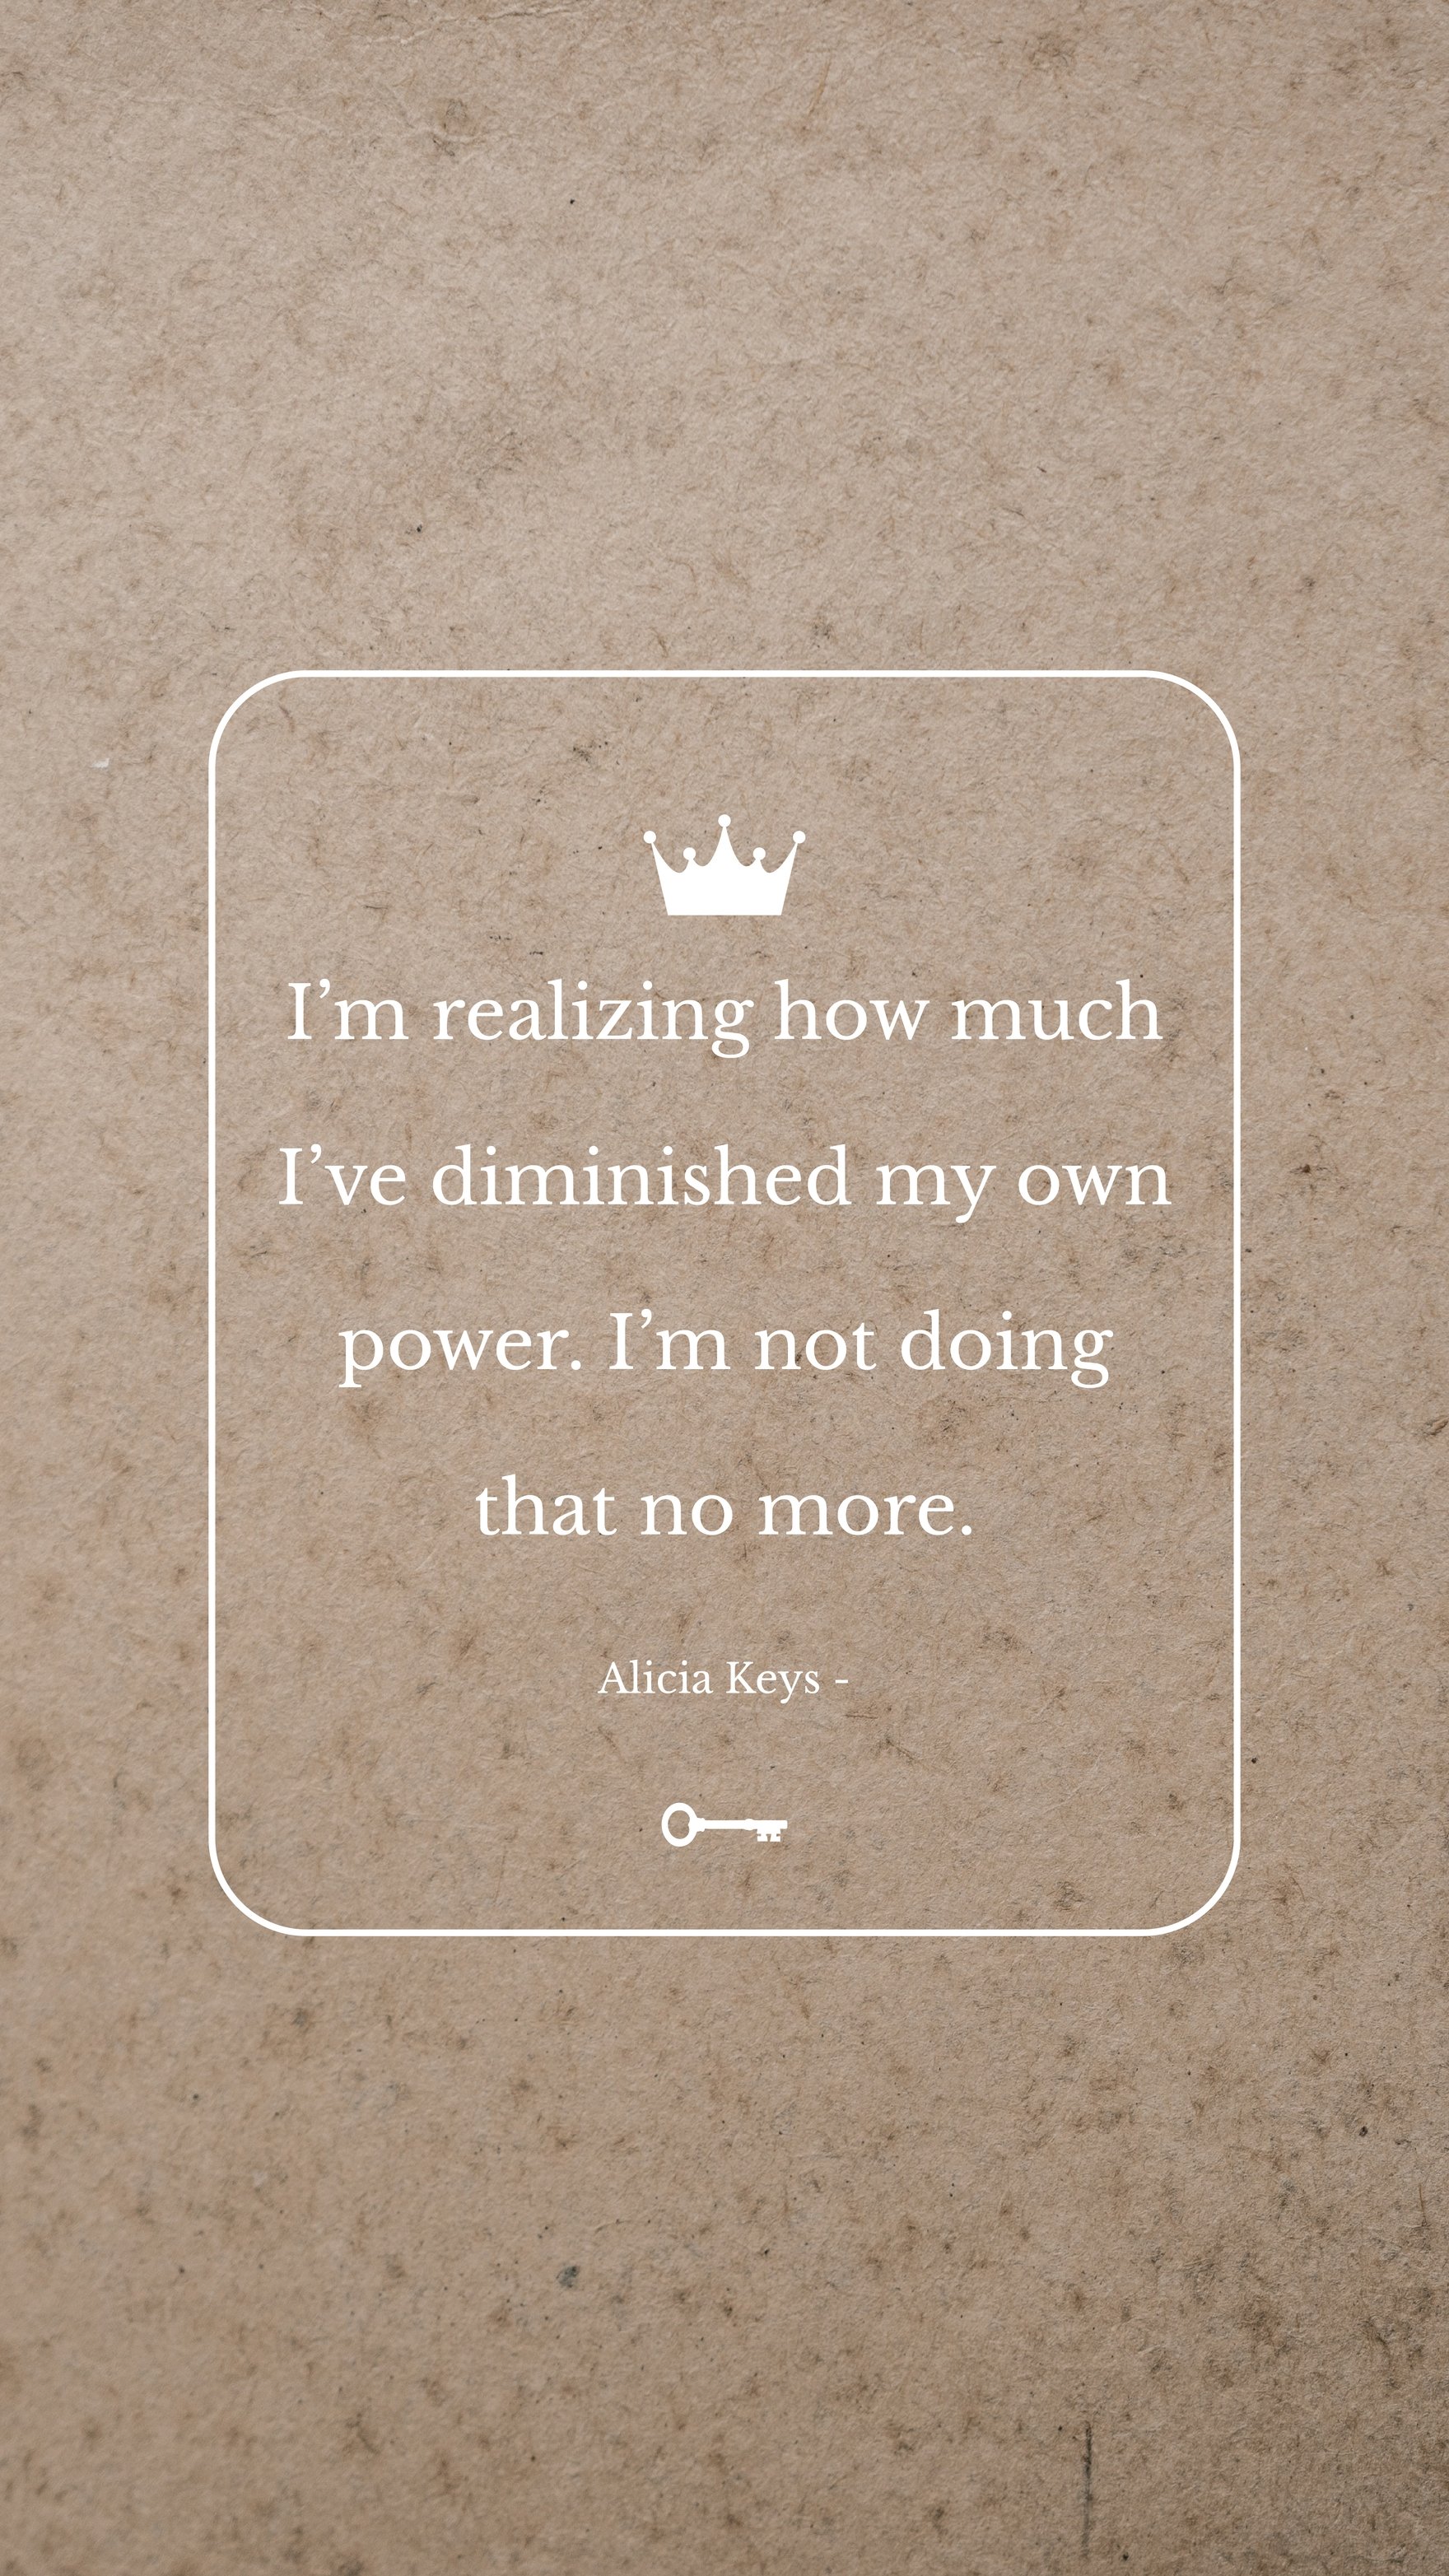 Alicia Keys - I’m realizing how much I’ve diminished my own power. I’m not doing that no more. in JPG